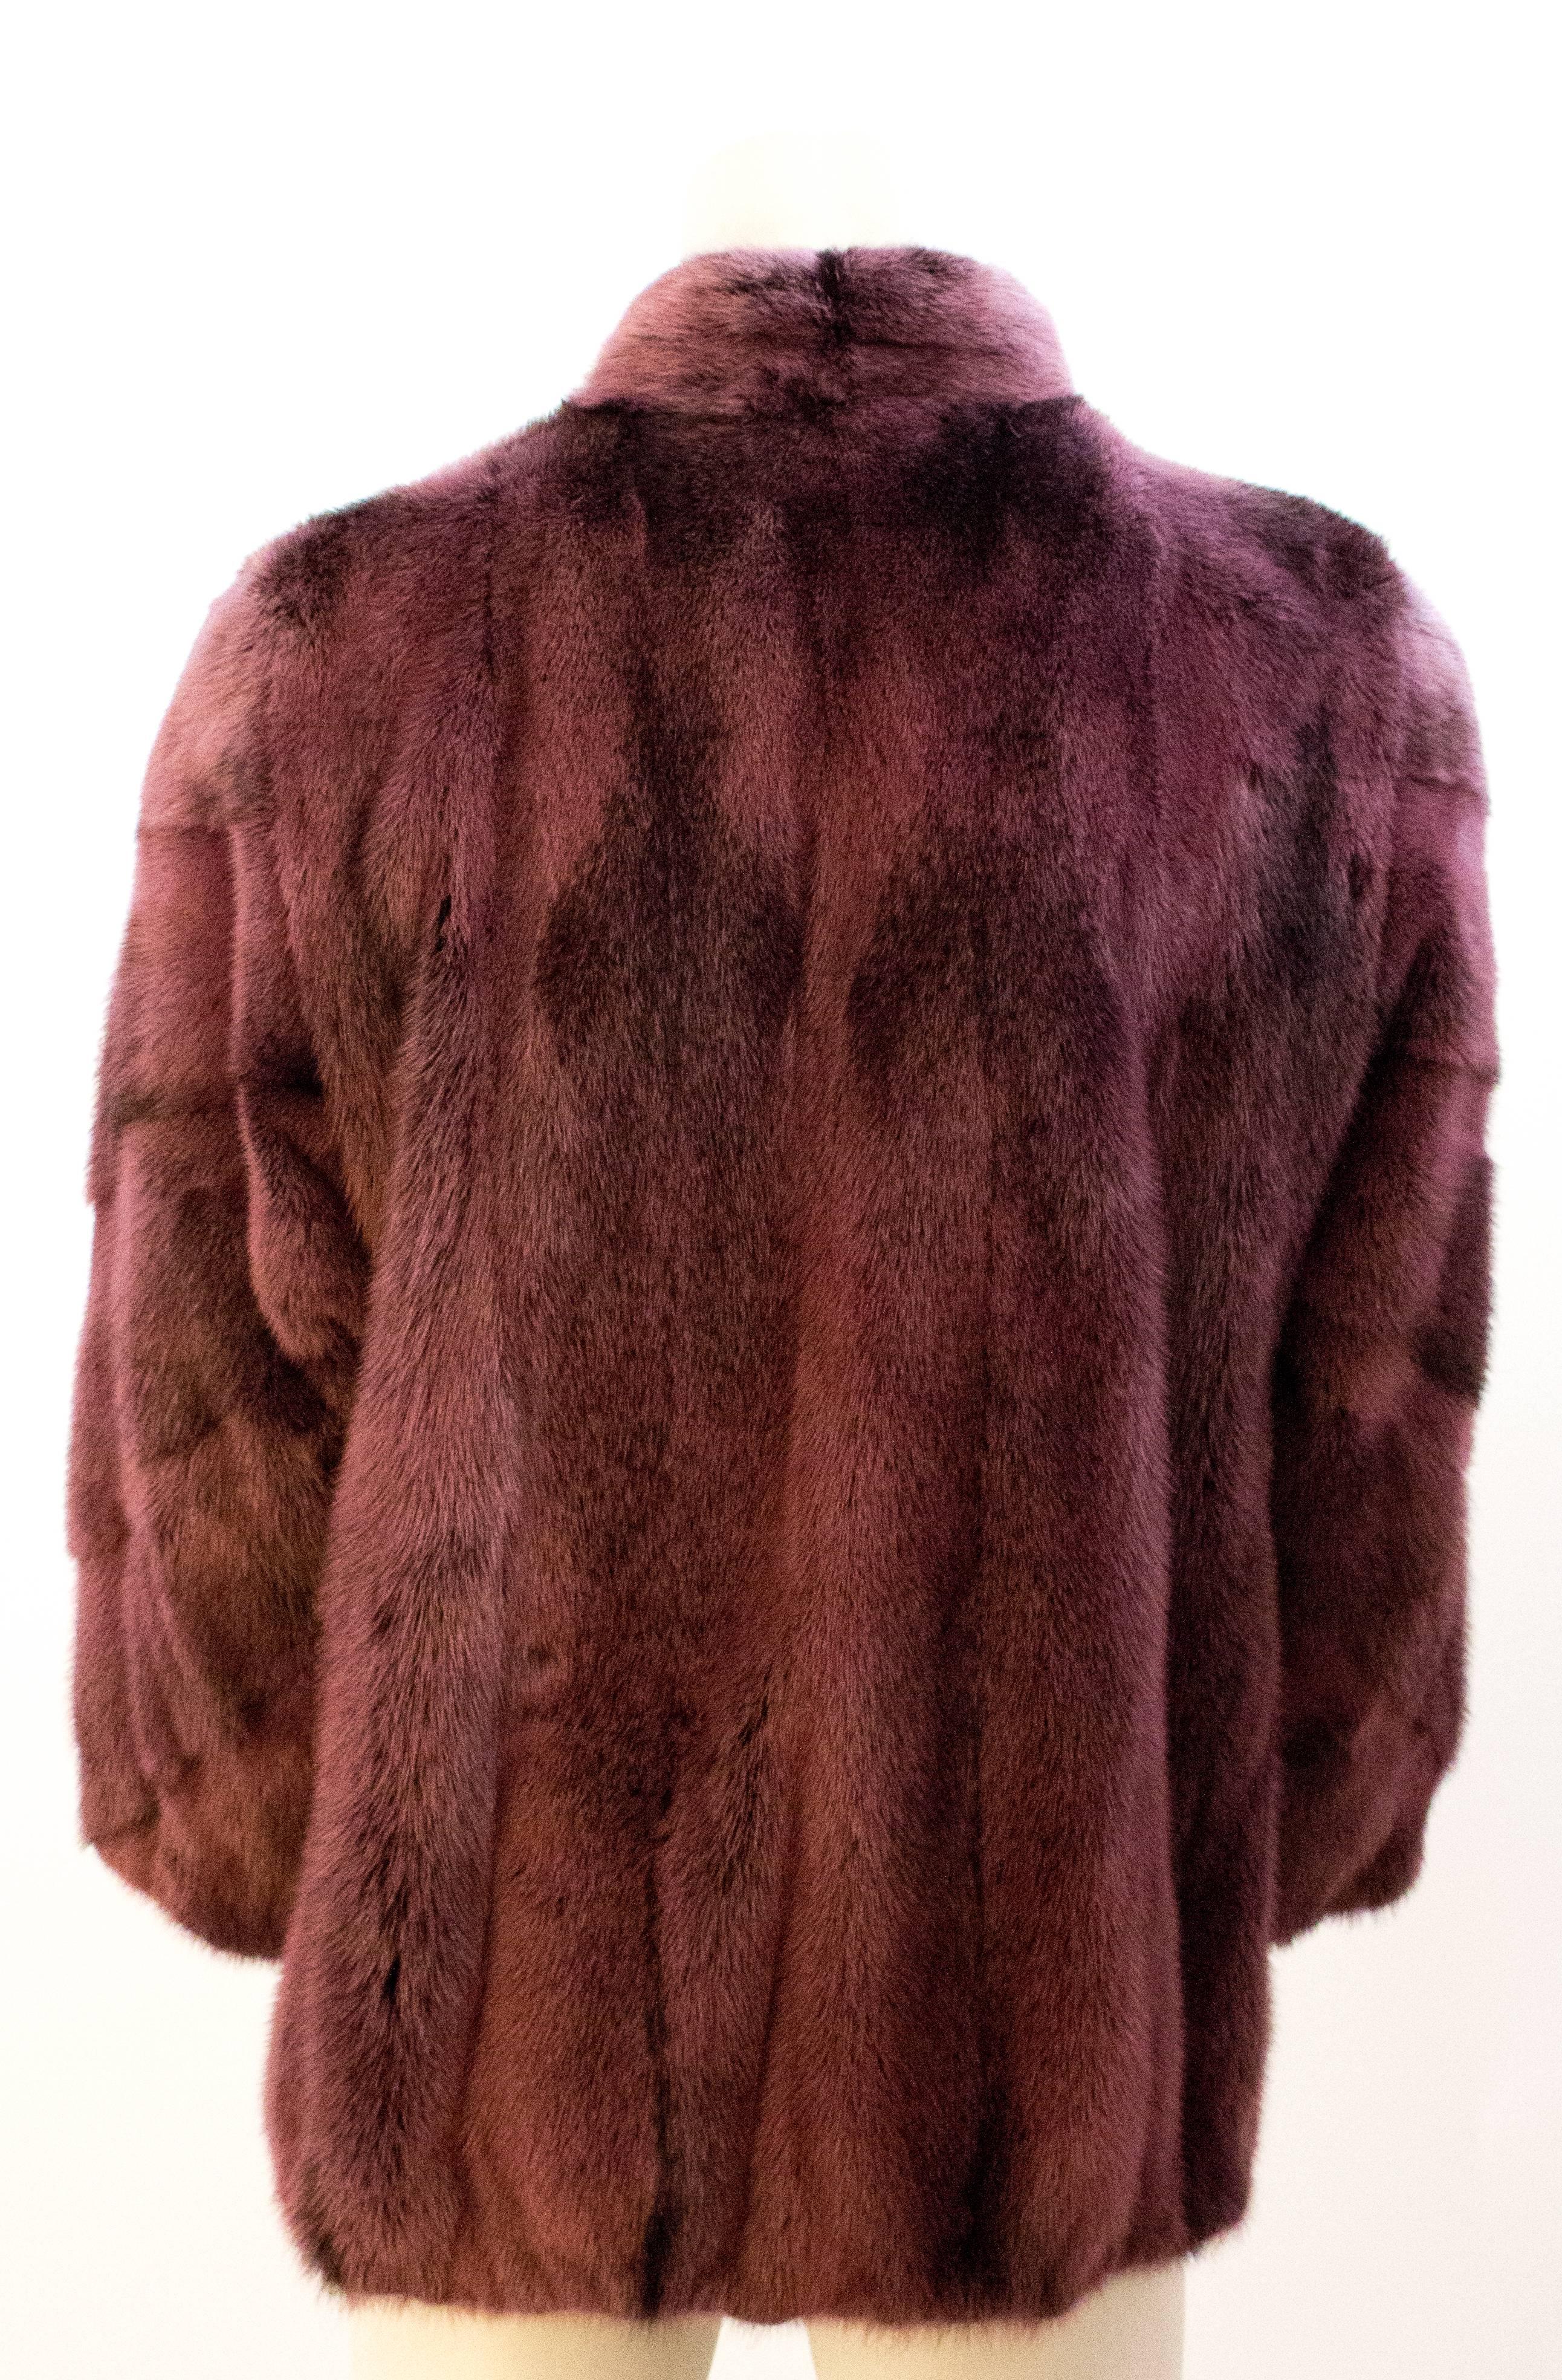 Purple Mink Bomber Fur Jacket with stand up collar. Zips up the front with leather trimmed black zipper. Fully lined

*Sleeve measurement: 24 inches
*Neck measurement: 18 inches 

